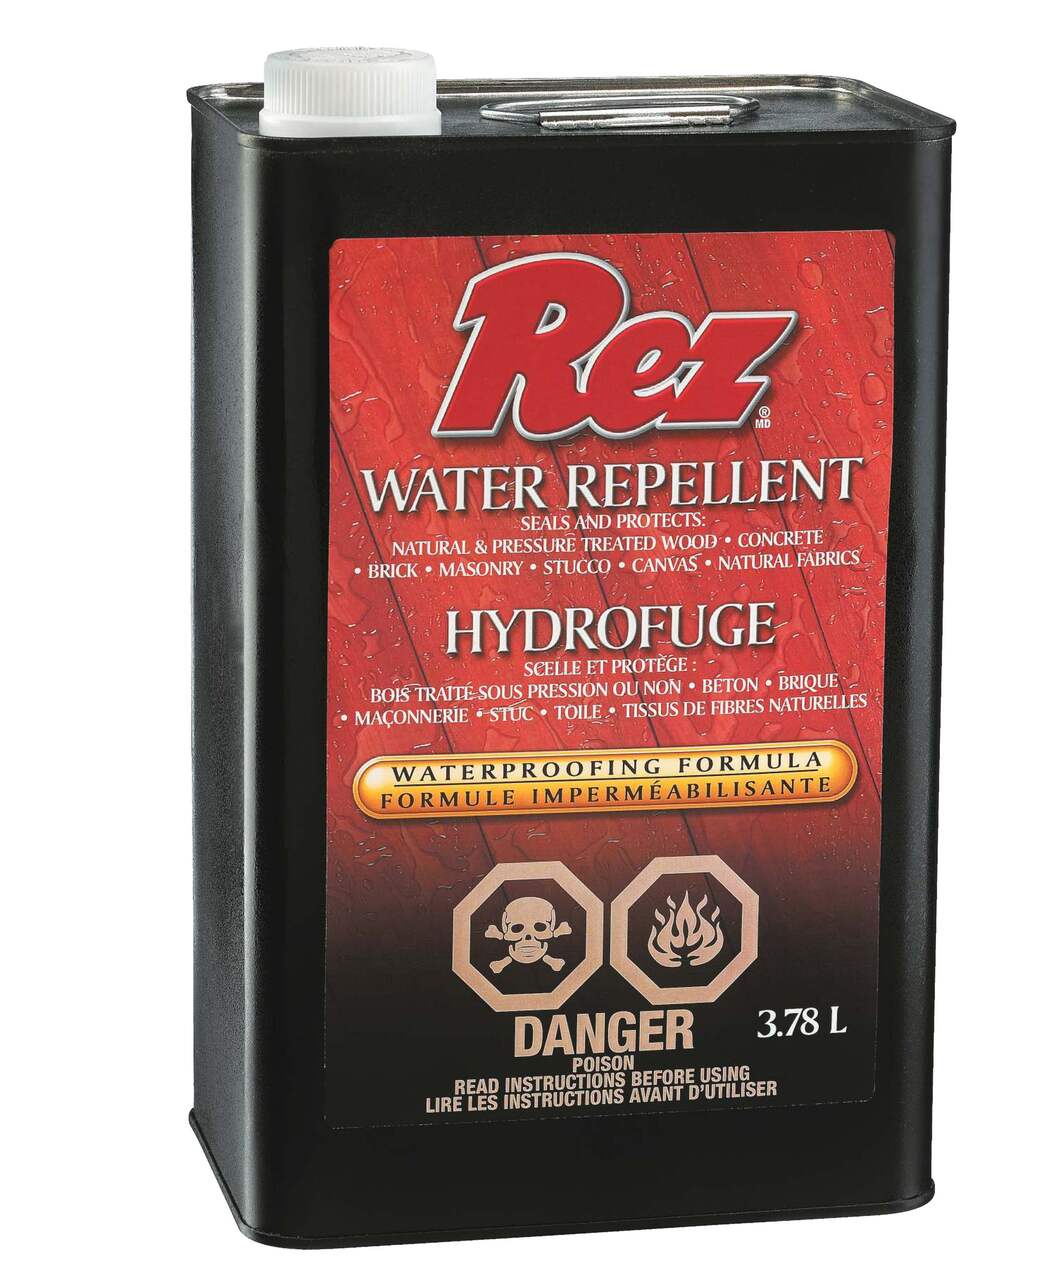 https://media-www.canadiantire.ca/product/fixing/paint/paints/0488610/rez-water-repellent-gallon-7f98db35-7105-42a8-b6a1-ec8e5de43523-jpgrendition.jpg?imdensity=1&imwidth=640&impolicy=mZoom